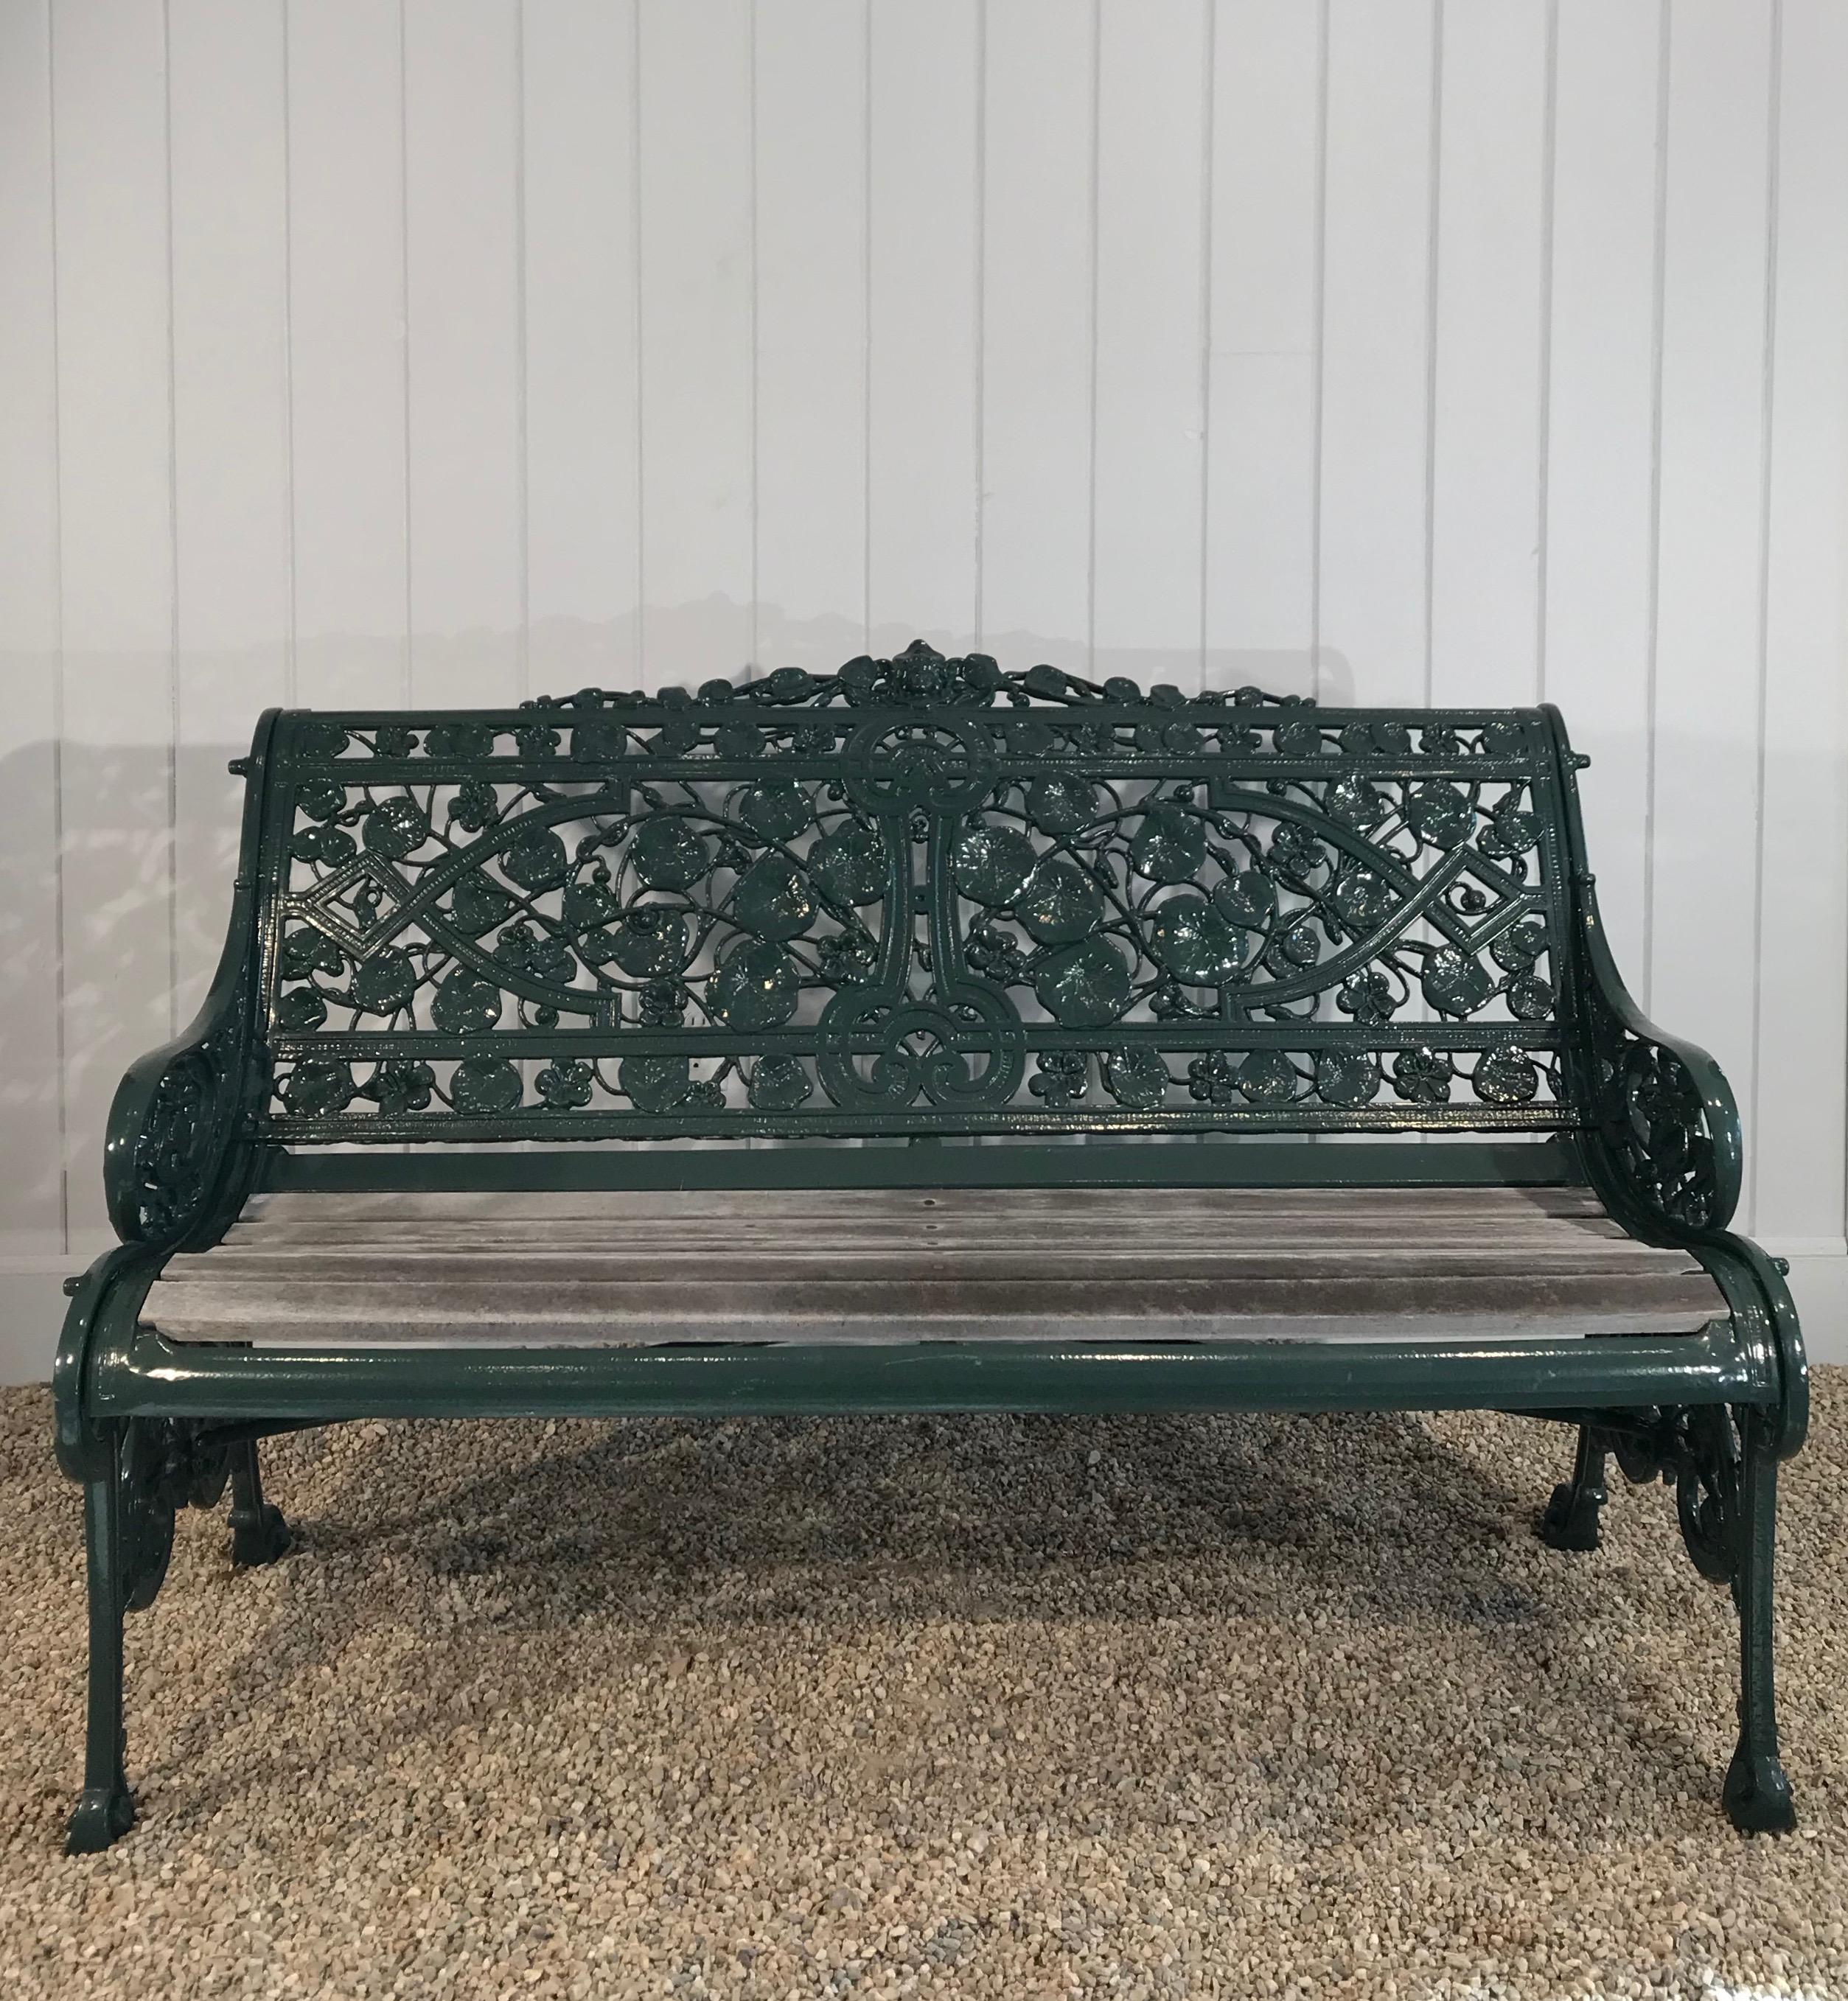 It is rare indeed to find an authentic Coalbrookdale Nasturtium bench in such wonderful condition. This beauty has been sandblasted, powder-coated in a dark glossy green surface and the slats have been replaced in the past 5 years. The depth of